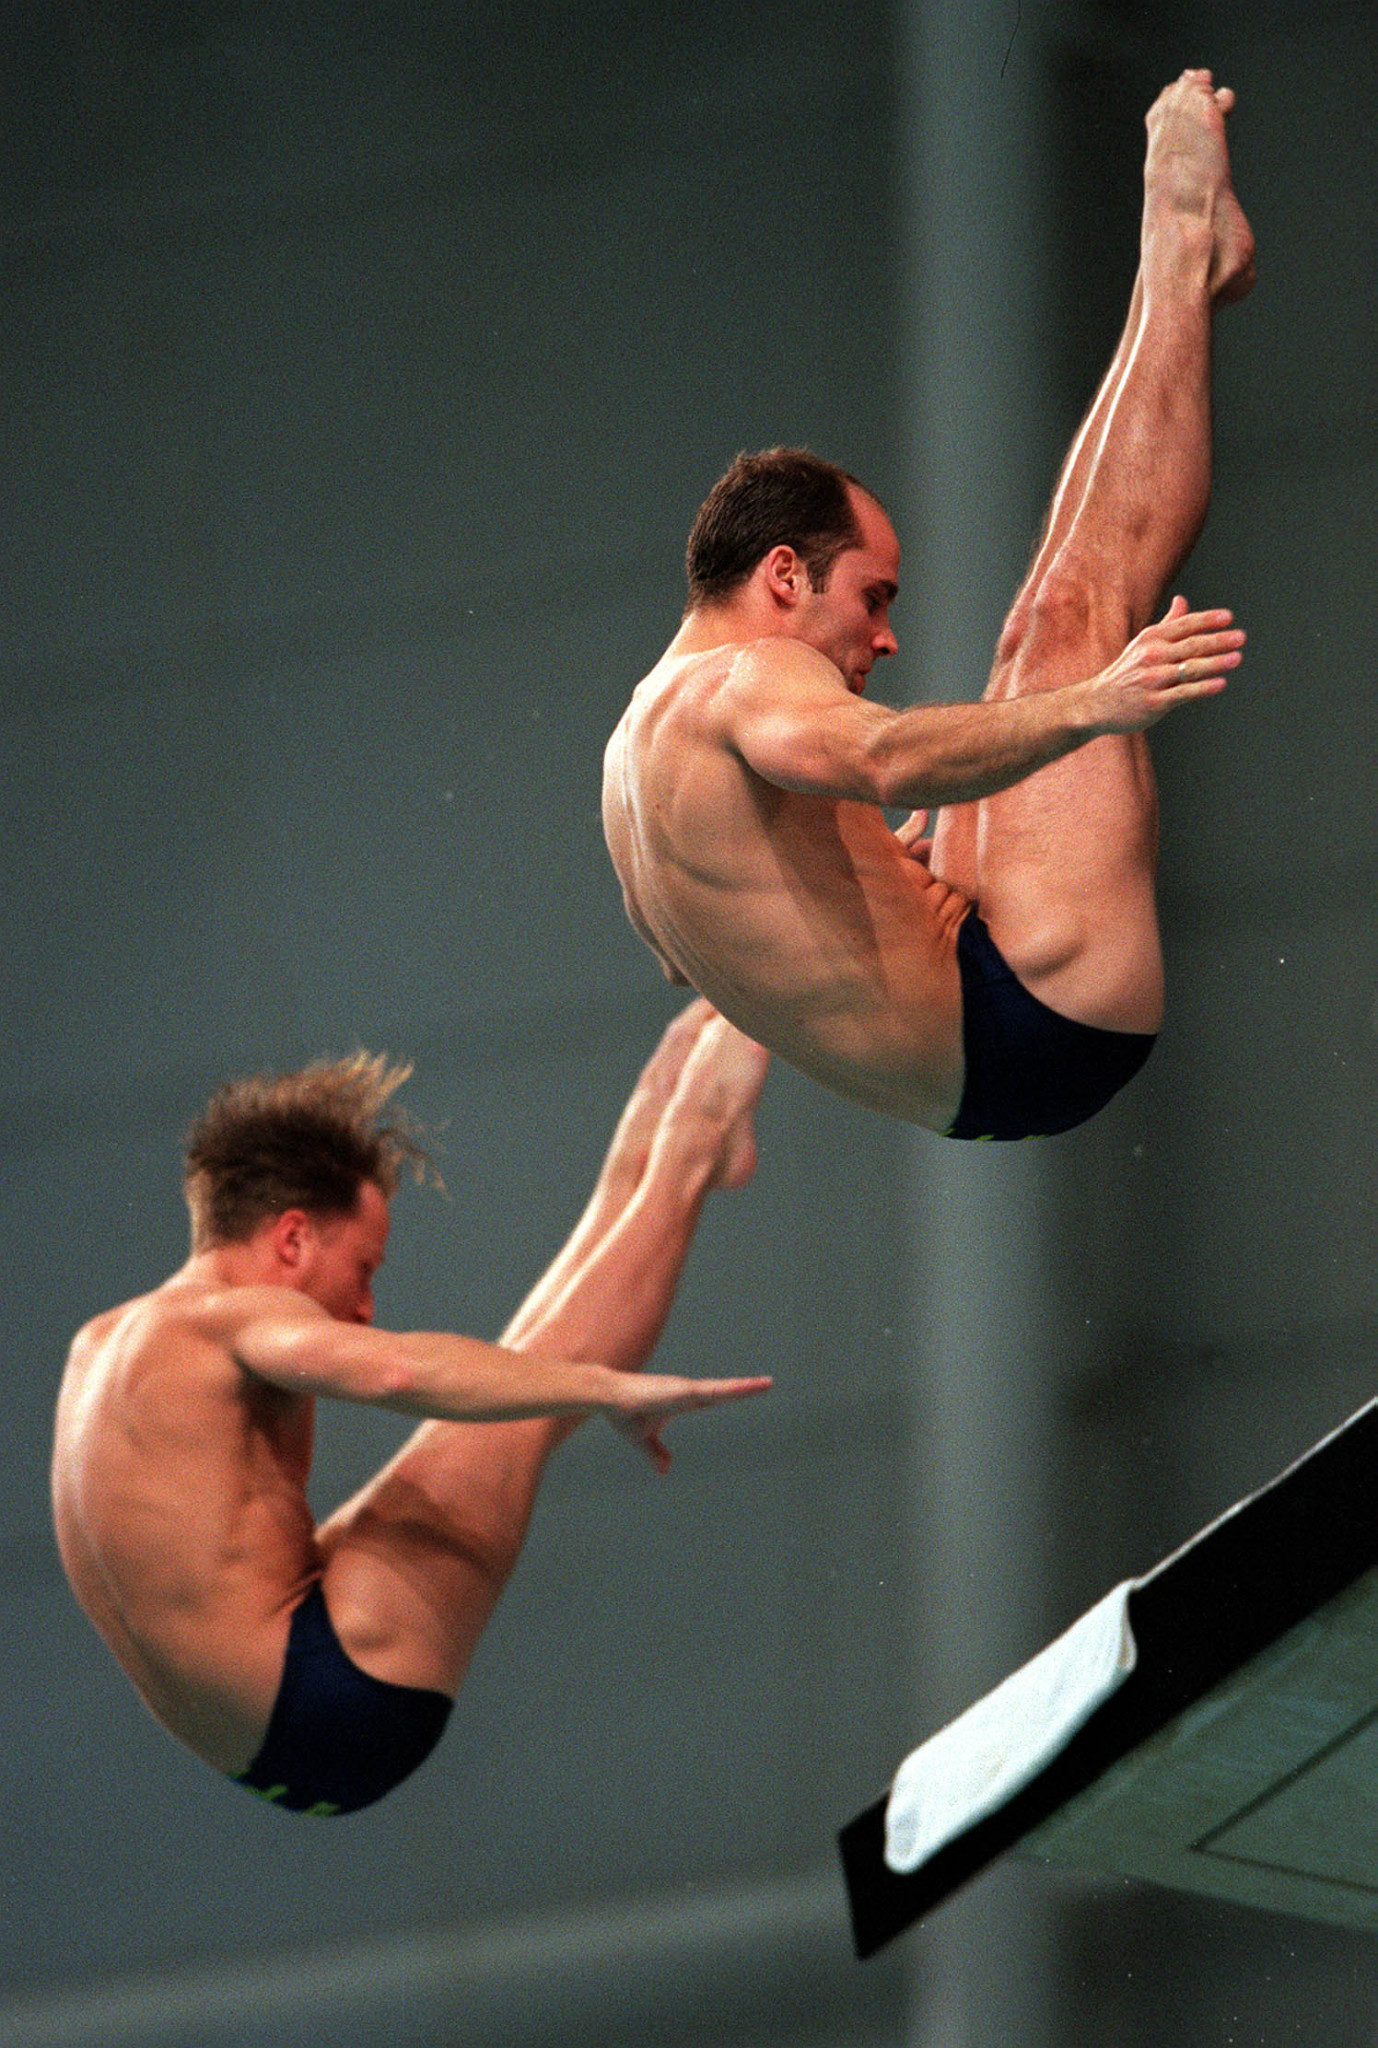 Hempel, right, won two Olympic medals including a bronze in the synchronised platform alongside Heiko Meyer, left, at Sydney 2000 ©Getty Images